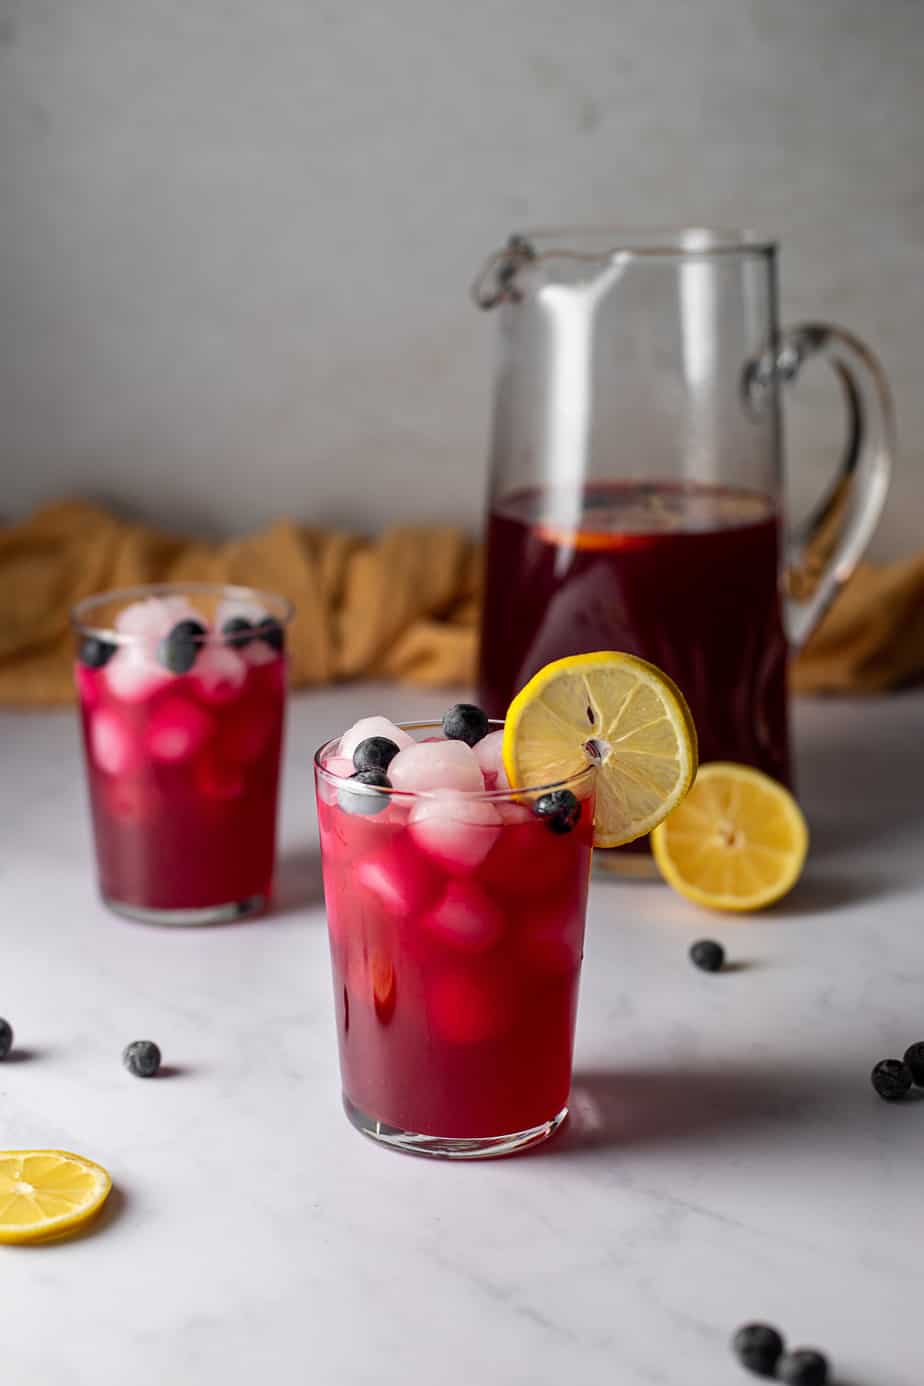 two glasses of blueberry lemonade, a pitcher of blueberry lemonade in the background